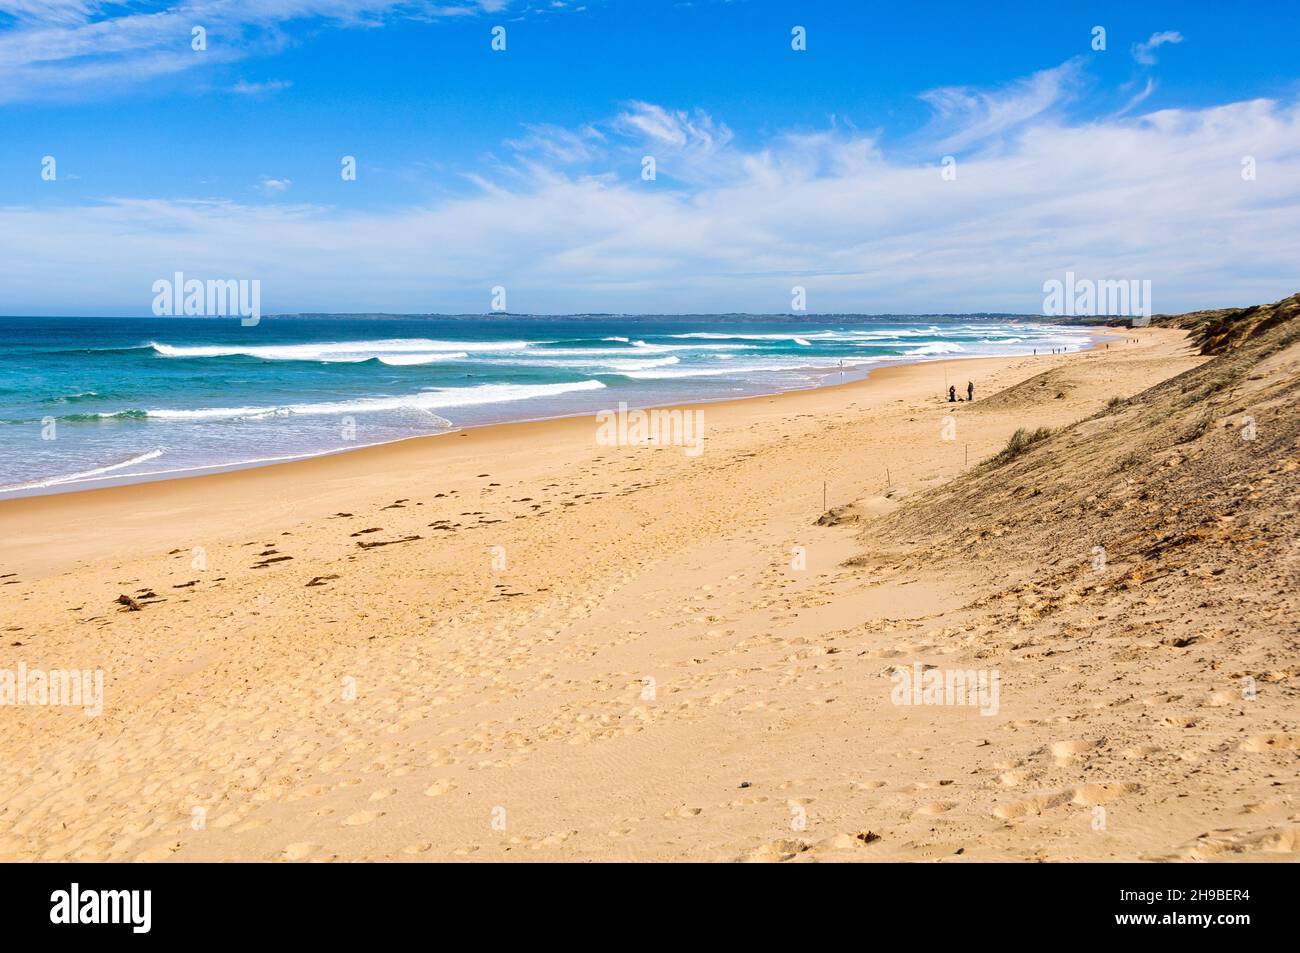 Woolamai Surf Beach is 4.2 km long and due to the westerly winds it has persistently  moderate to high waves averaging 1.7 meter - Phillip Island, Vic Stock Photo